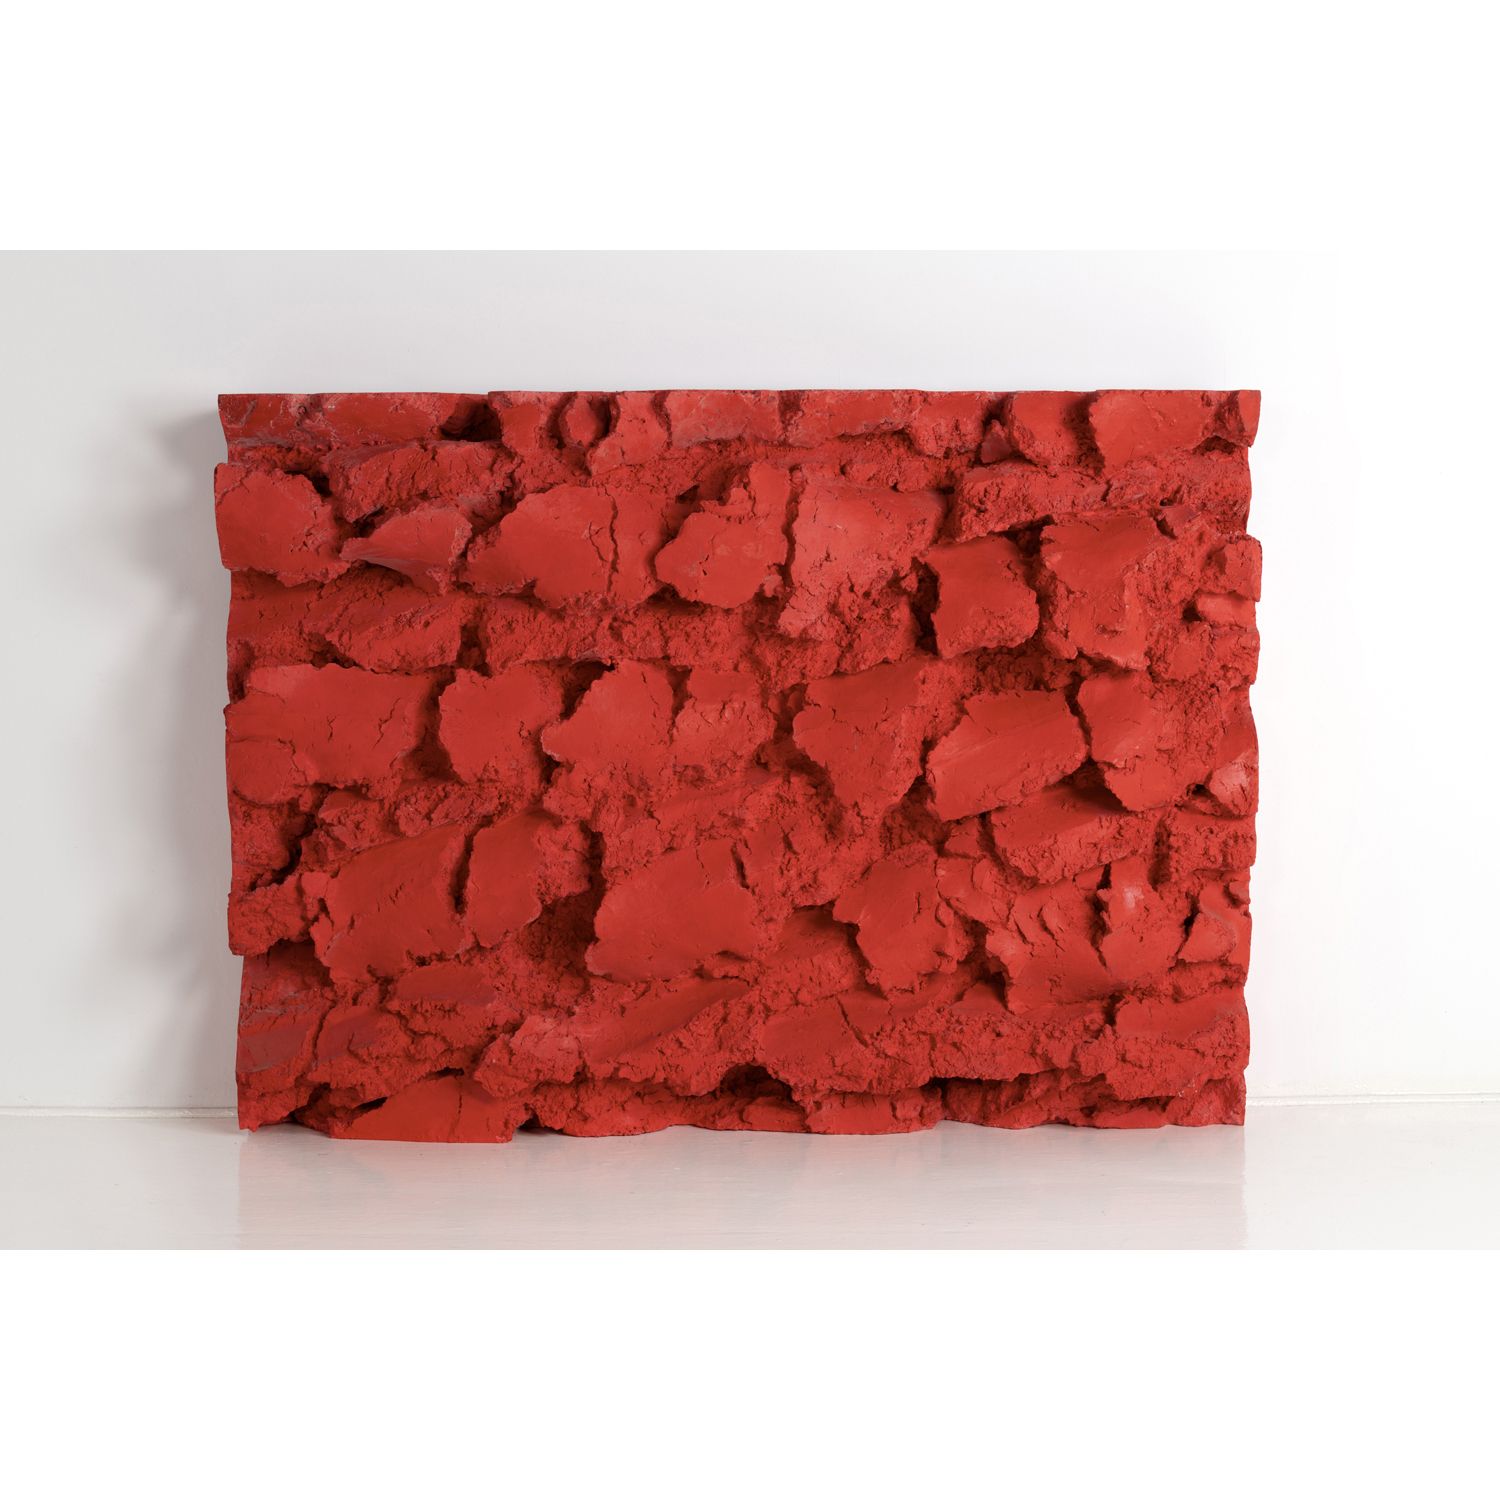 Null Didier Marcel (born 1961)

Labour rouge corail, 2012

Integrally colored ac&hellip;